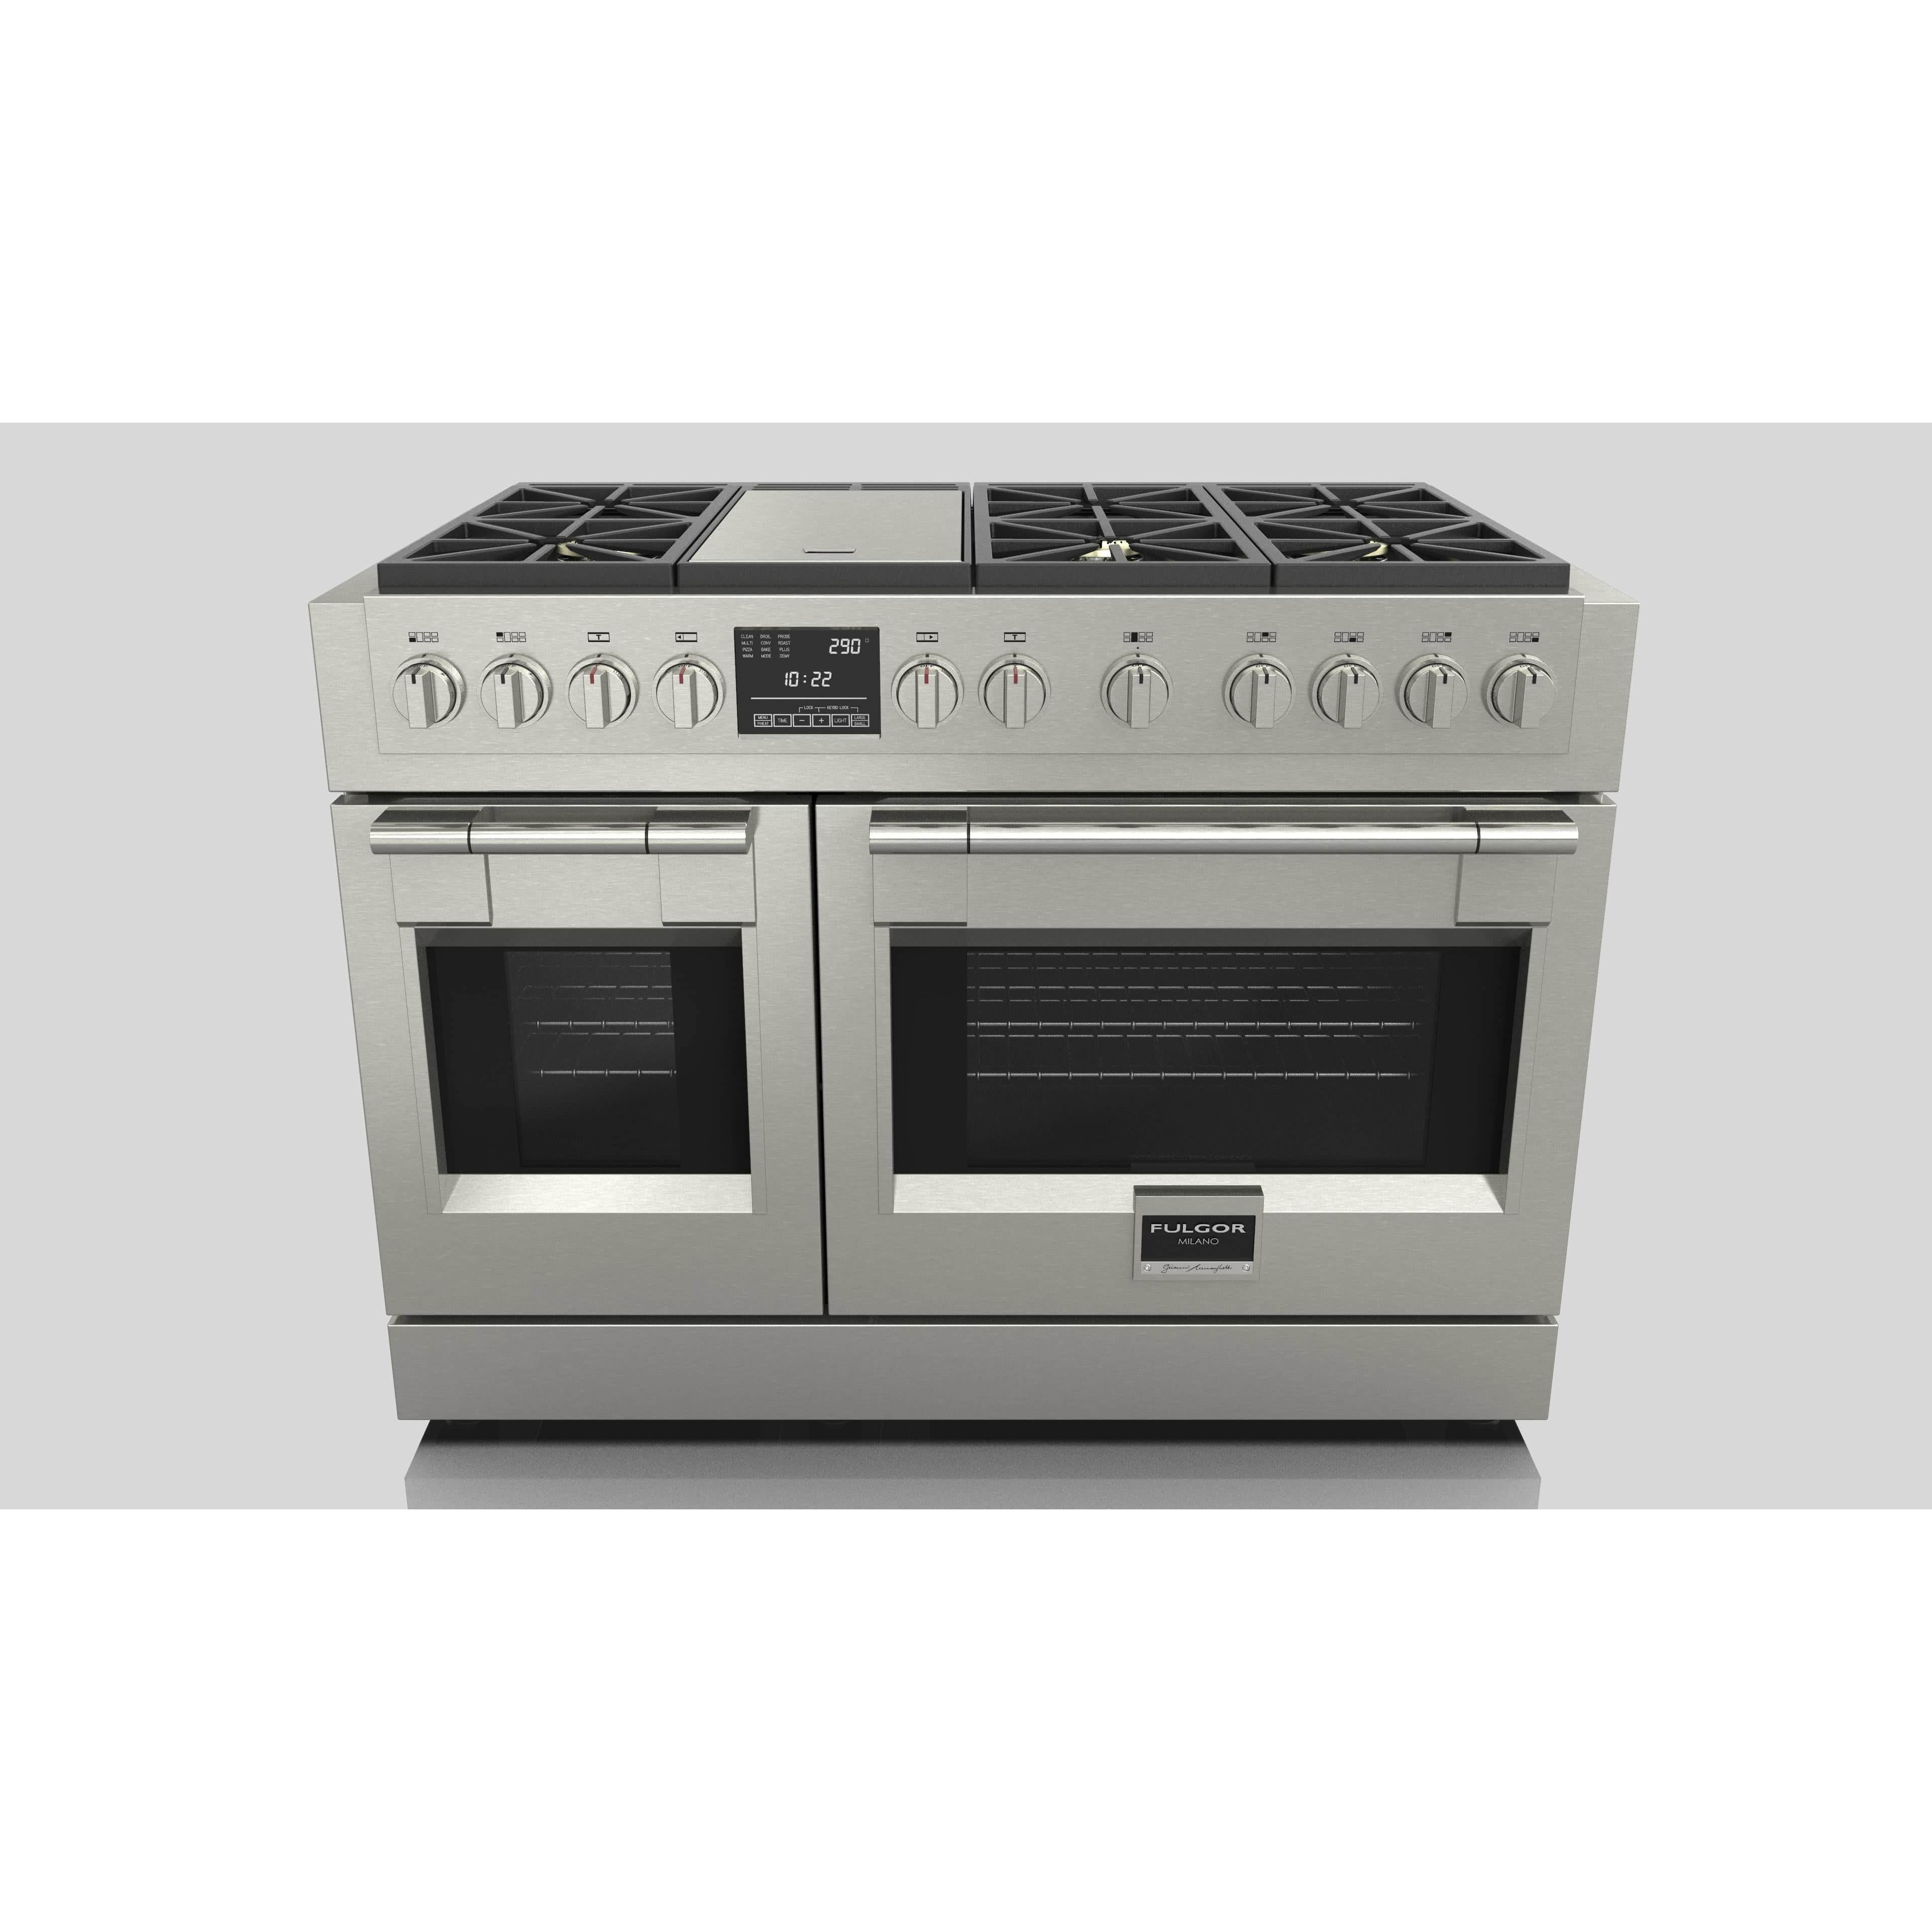 Fulgor Milano 48" Dual Fuel Professional Range with 6 Dual Flame Burners,  6.5 Cu. Ft. Total Capacity Stainless Steel - F6PDF486GS1 Ranges F6PDF486GS1 Luxury Appliances Direct